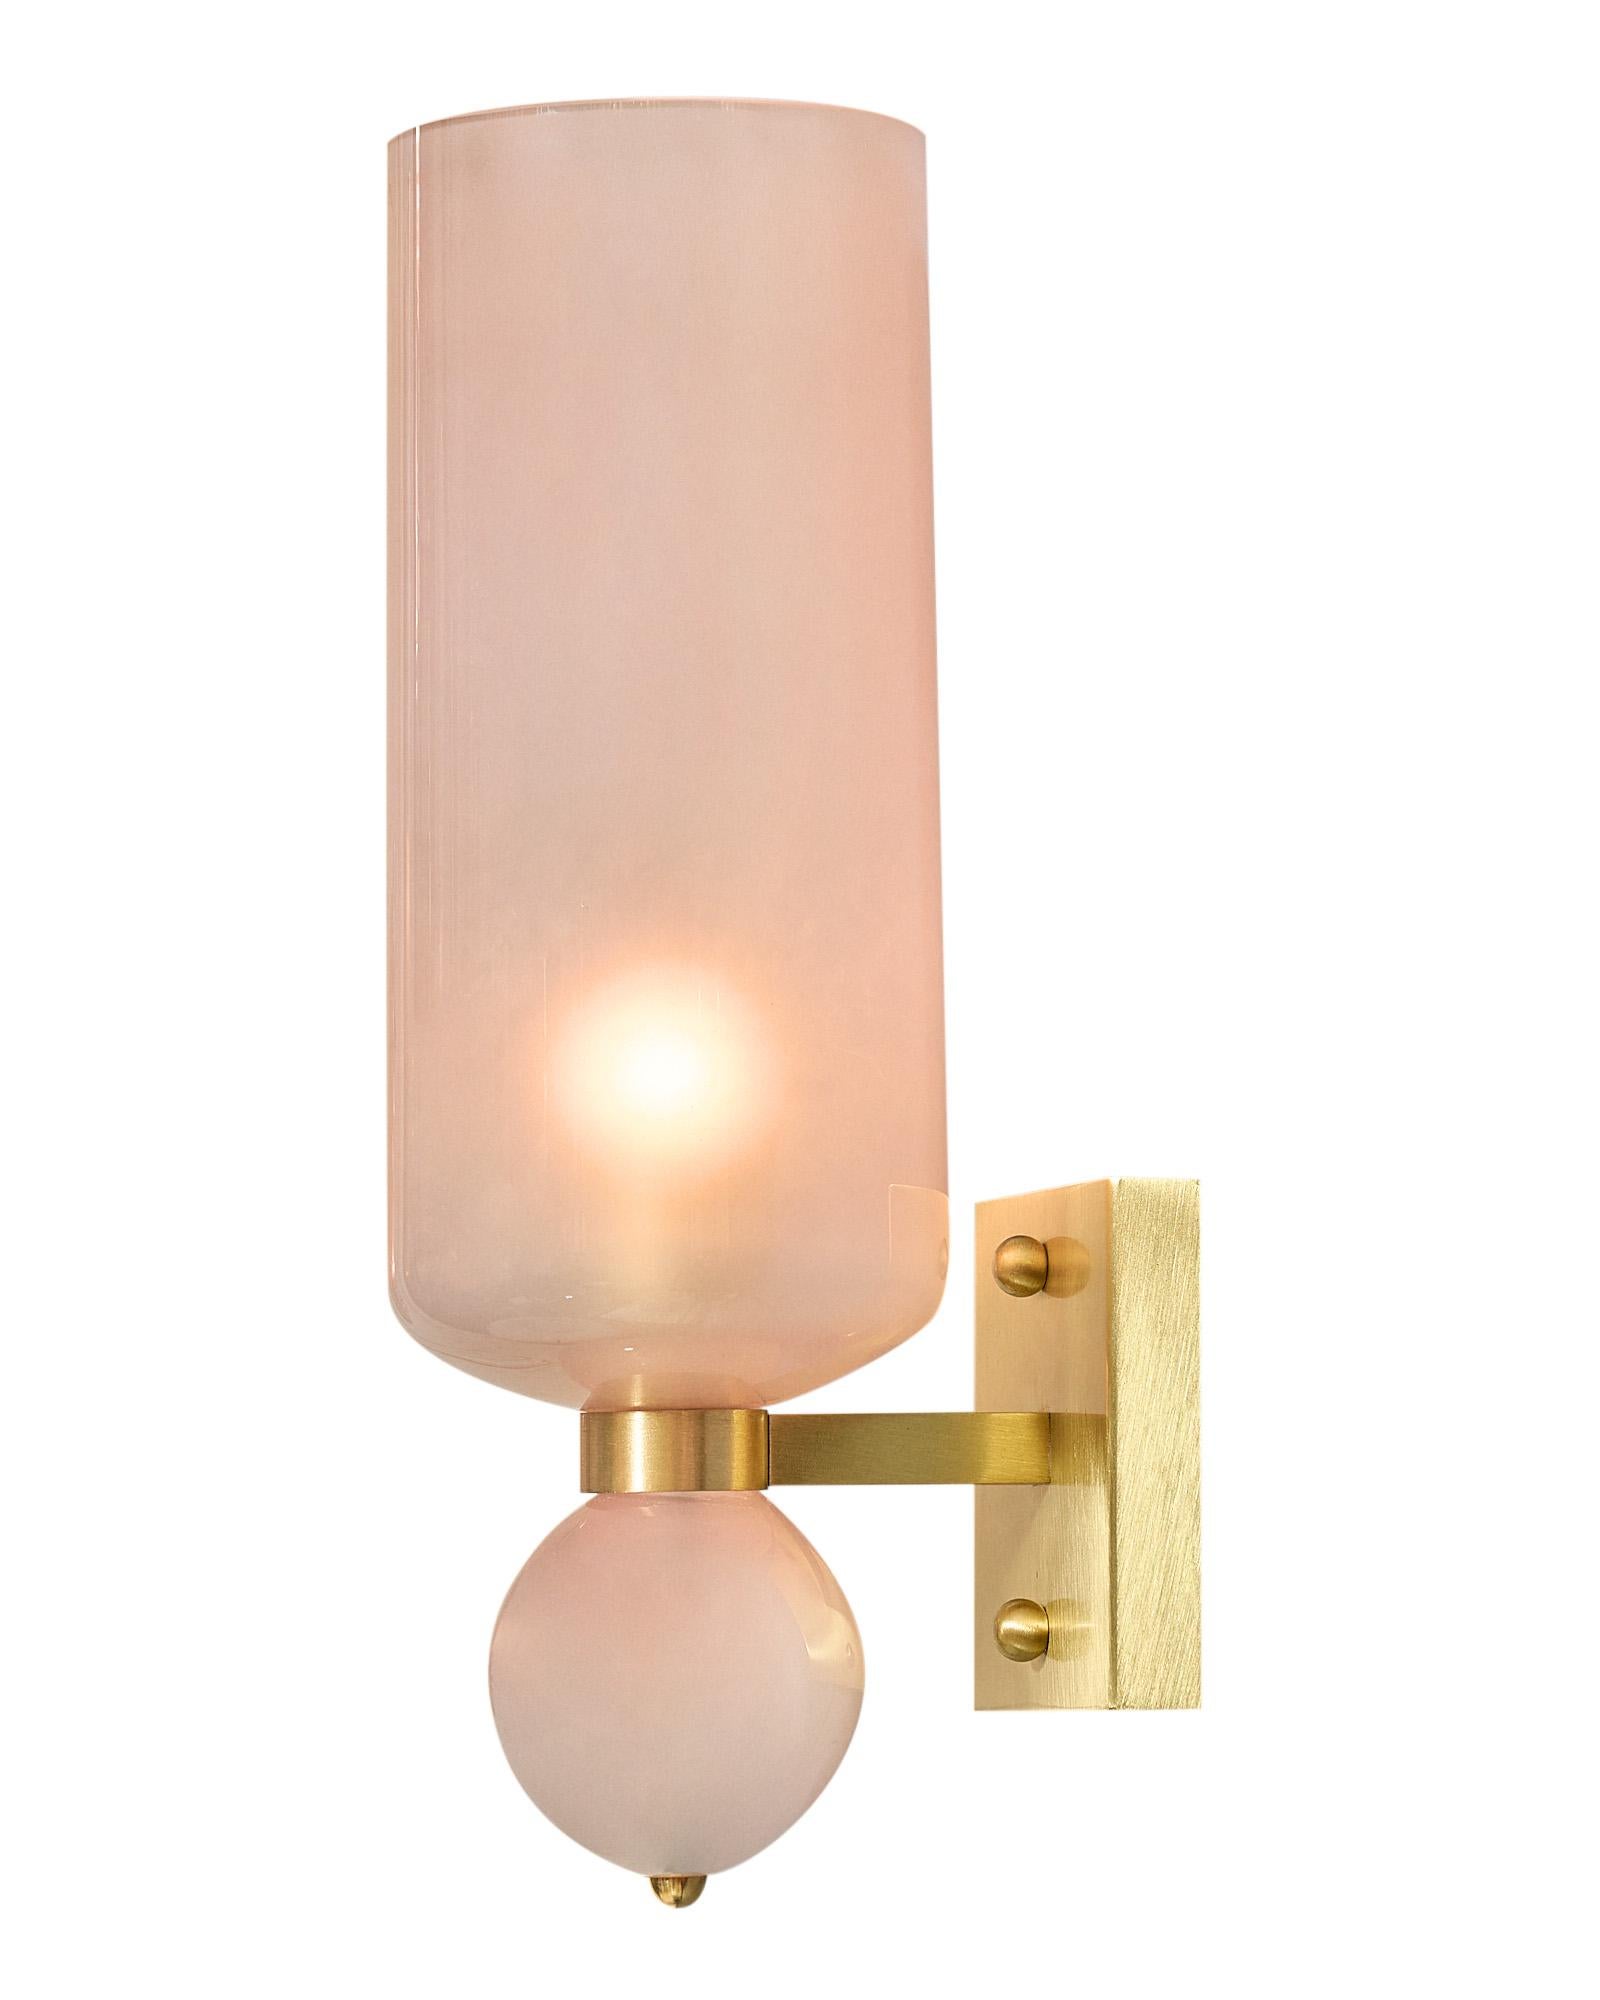 Pair of sconces, Italian, from the Island of Murano outside of Venice. The torchiere sconces feature hand blown pink pearlescent glass components on a polished brass structure. They have been newly wired to fit US standards.